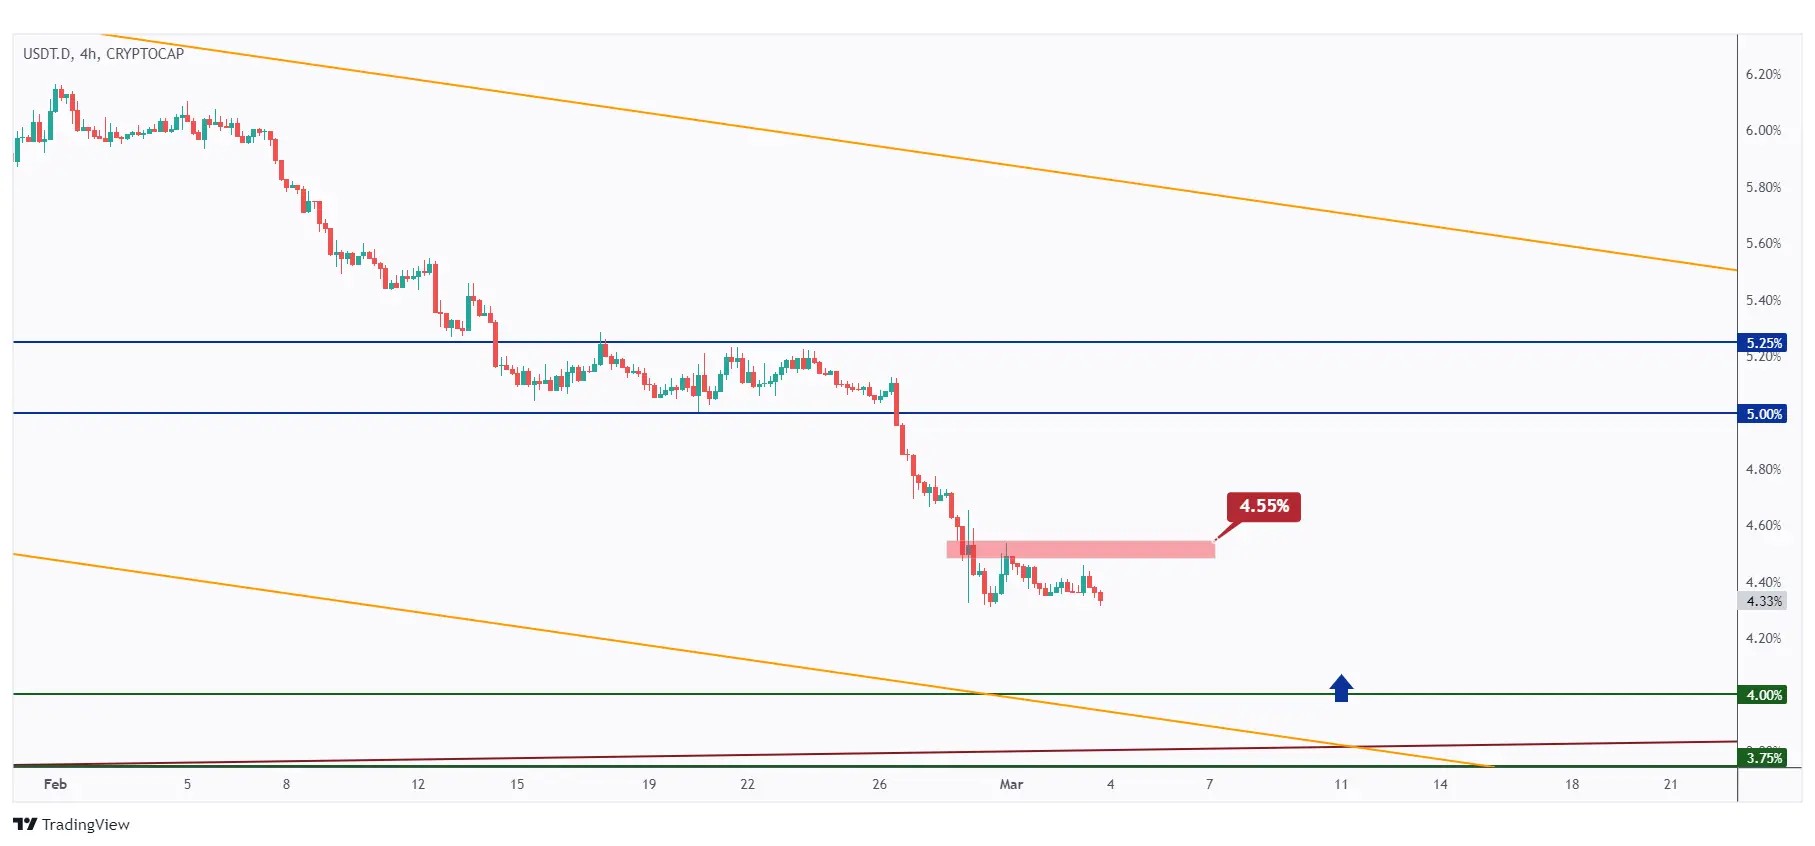 USDT.D 4h chart showing the last major high at 4.55% that we need a break above for the bulls to take over.